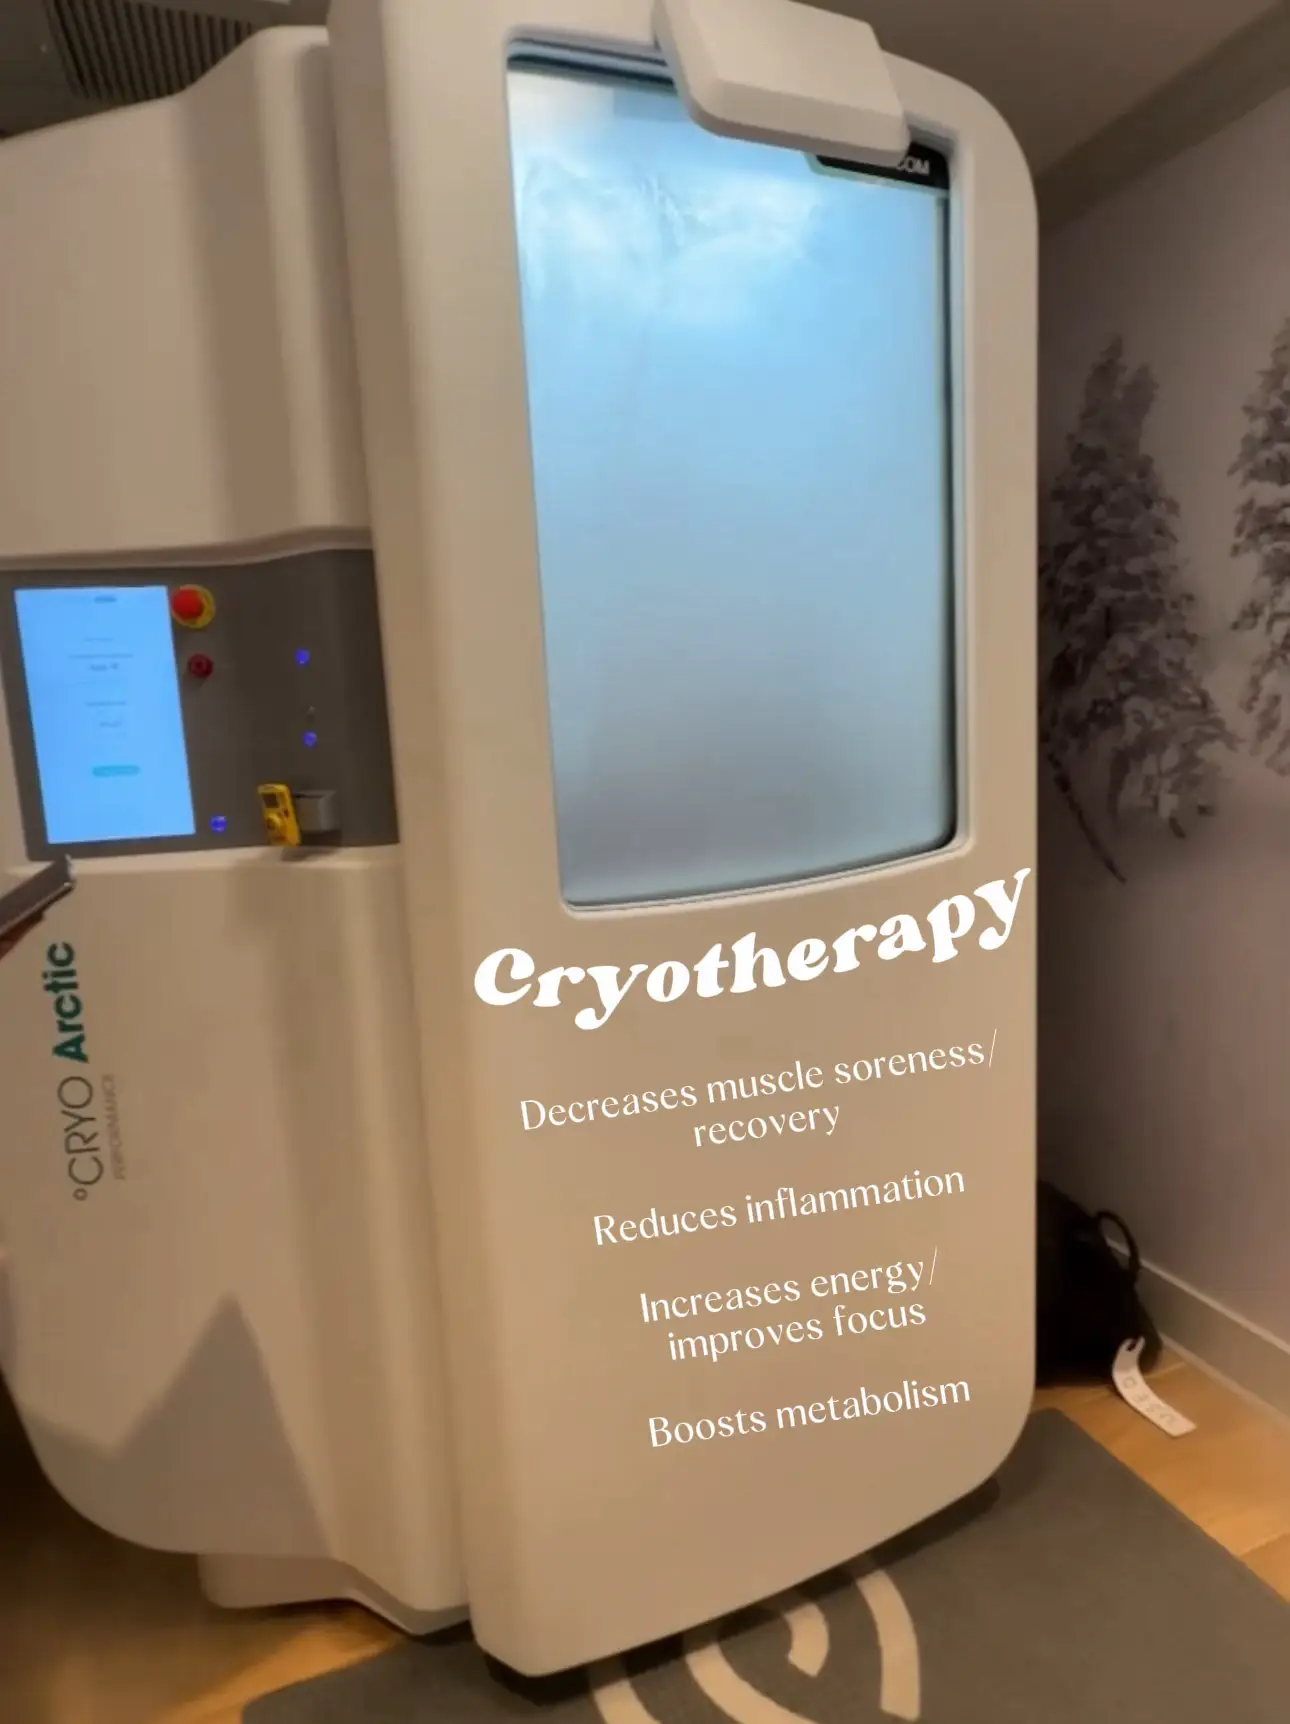  A room with a cryotherapy machine on the wall.